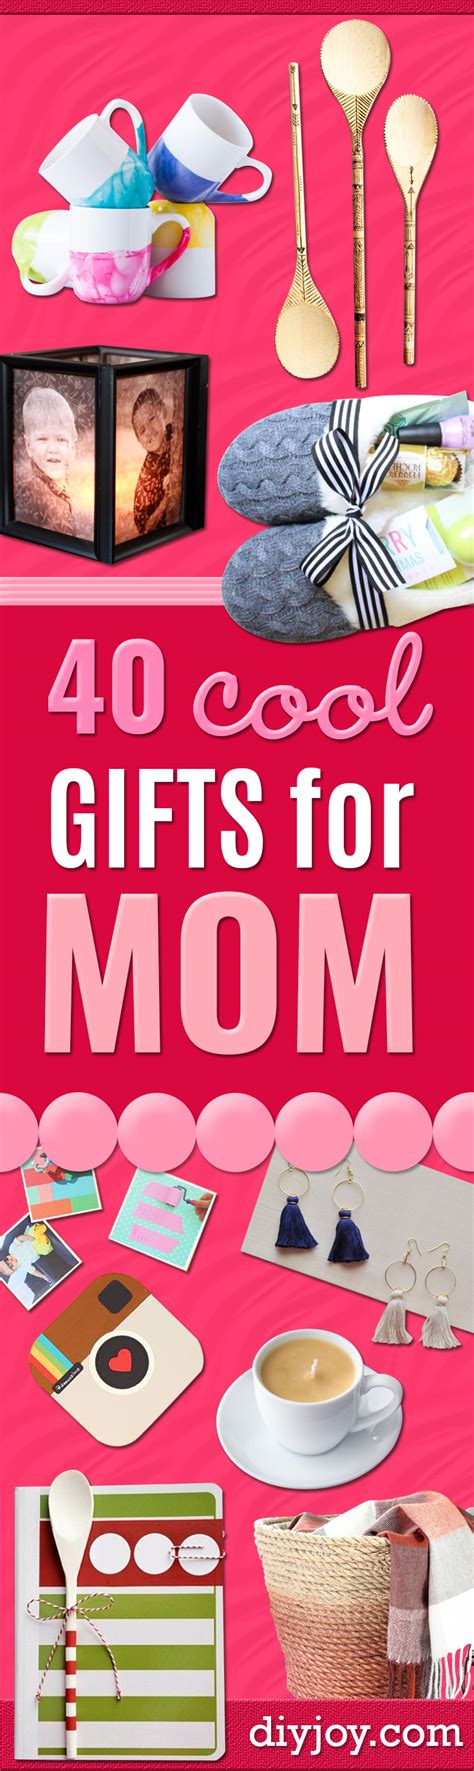 Mom is not always easy to shop for, but you know her better than anyone. 40 Coolest Gifts To Make for Mom